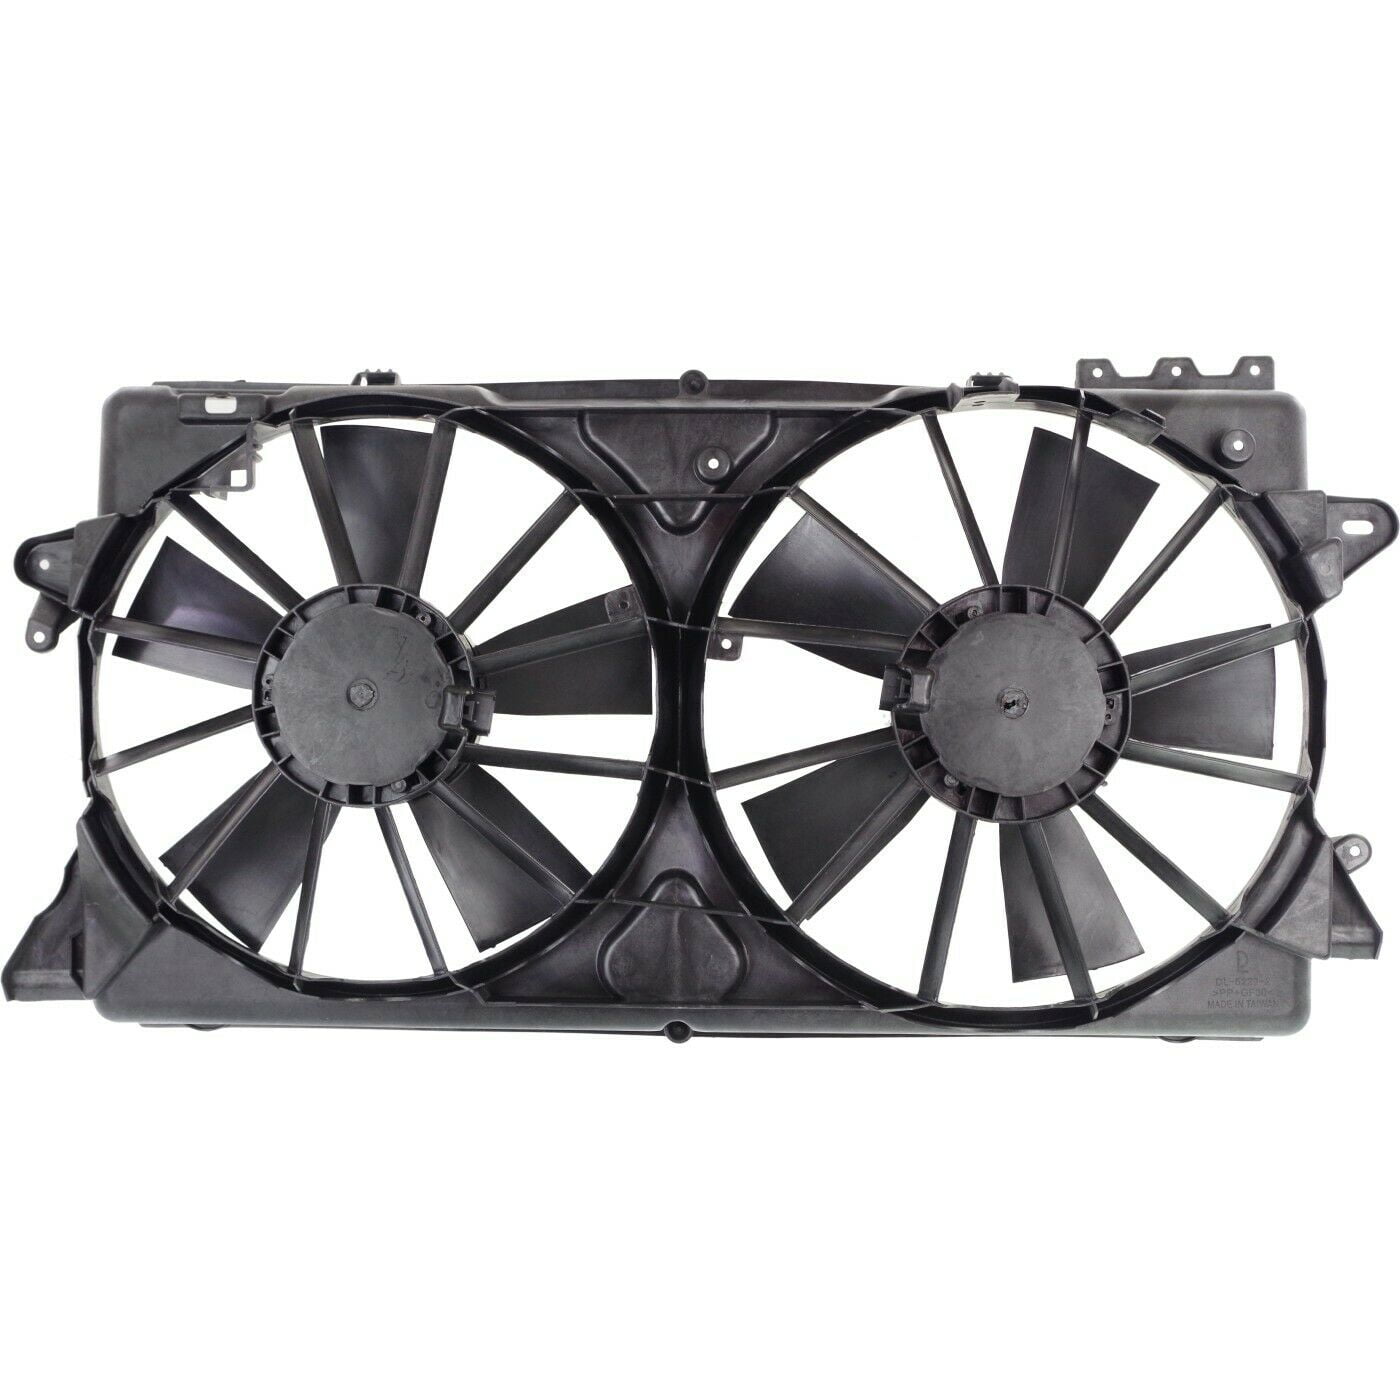 Radiator Dual Cooling Fan Assembly for Ford Pickup Truck SUV New Car   Truck Parts money-sense.net